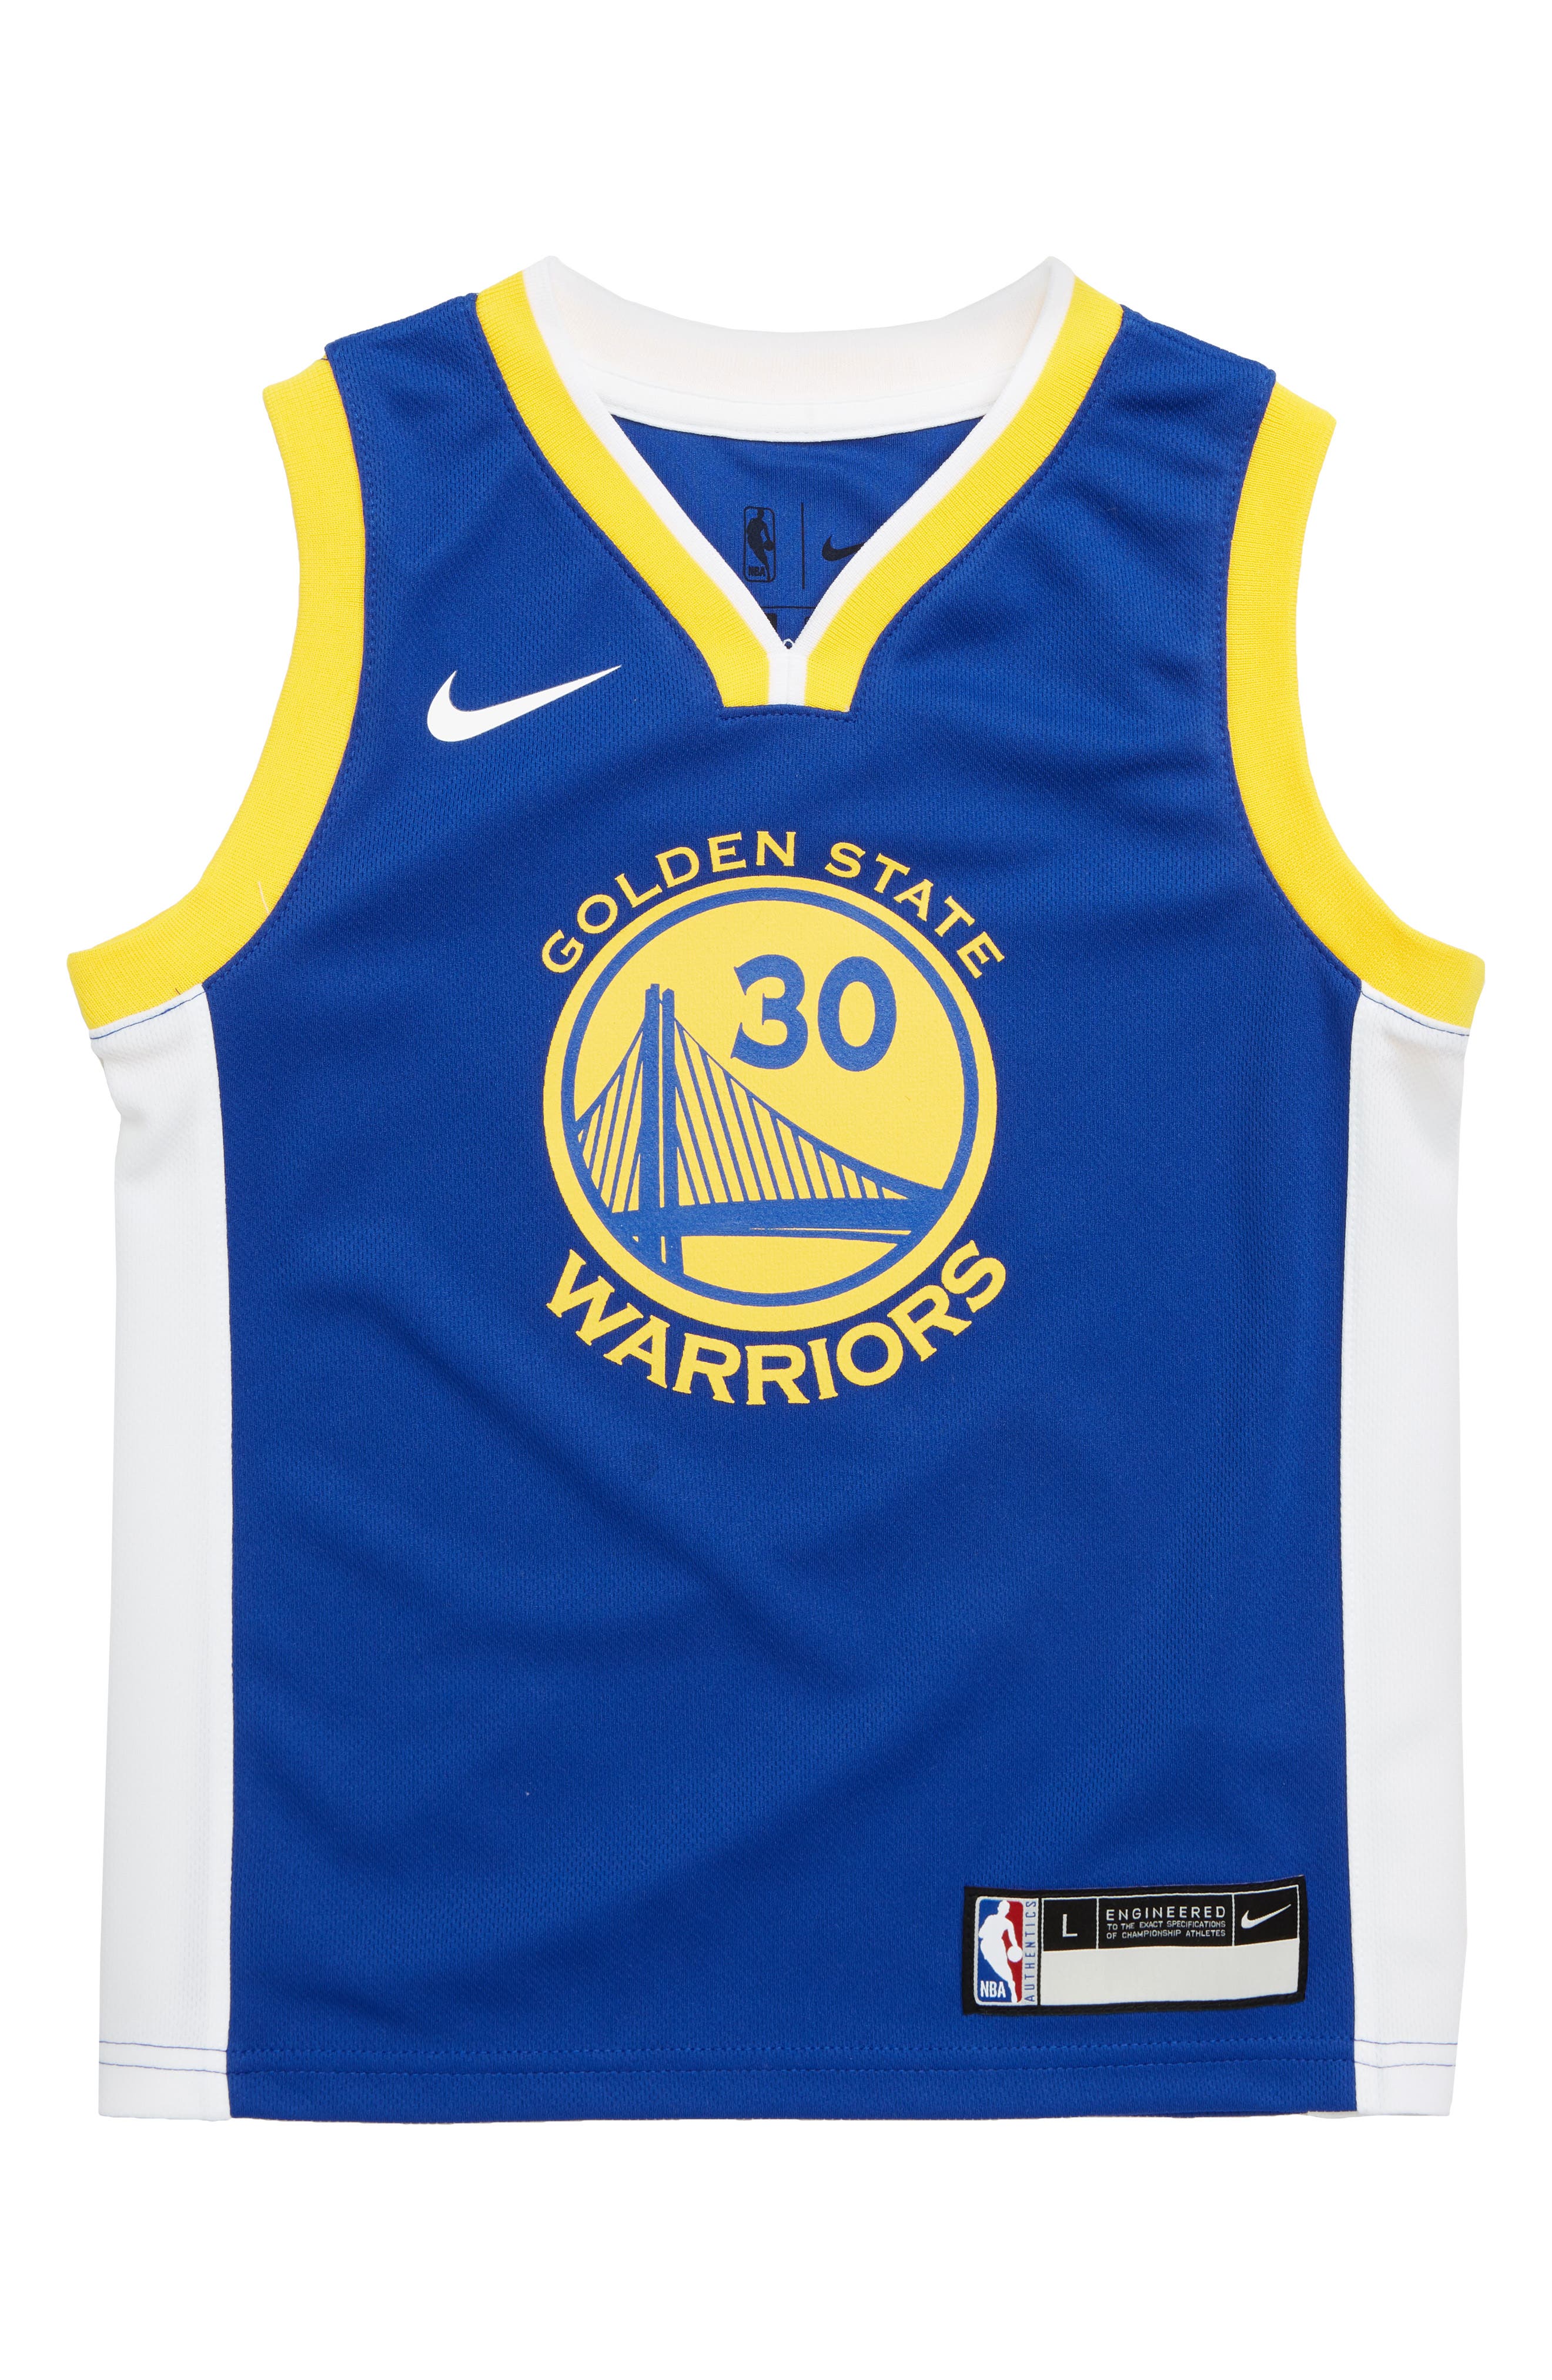 golden state jersey colors